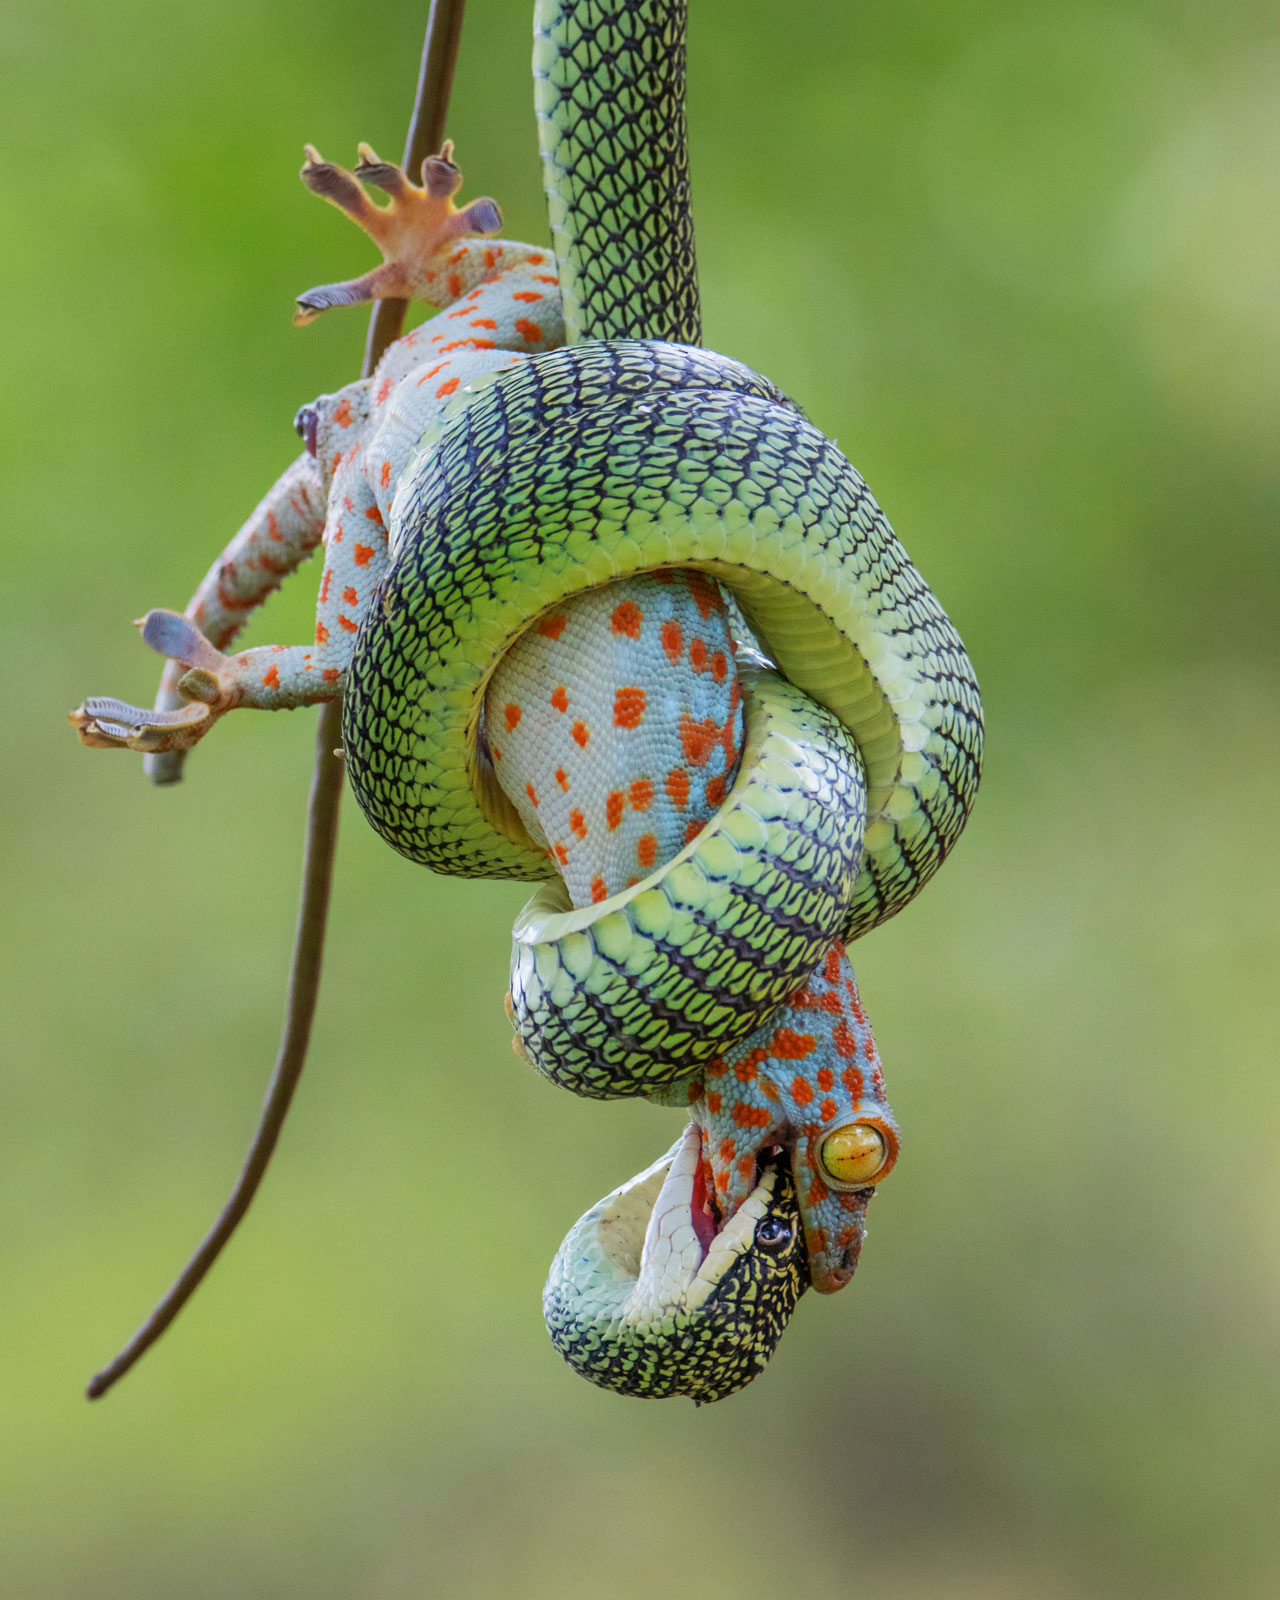 A golden tree snake squeezes to death a red-spotted tokay gecko in the jungle of Thailand. ©Wei Fu. Wildlife Photographer of the Year